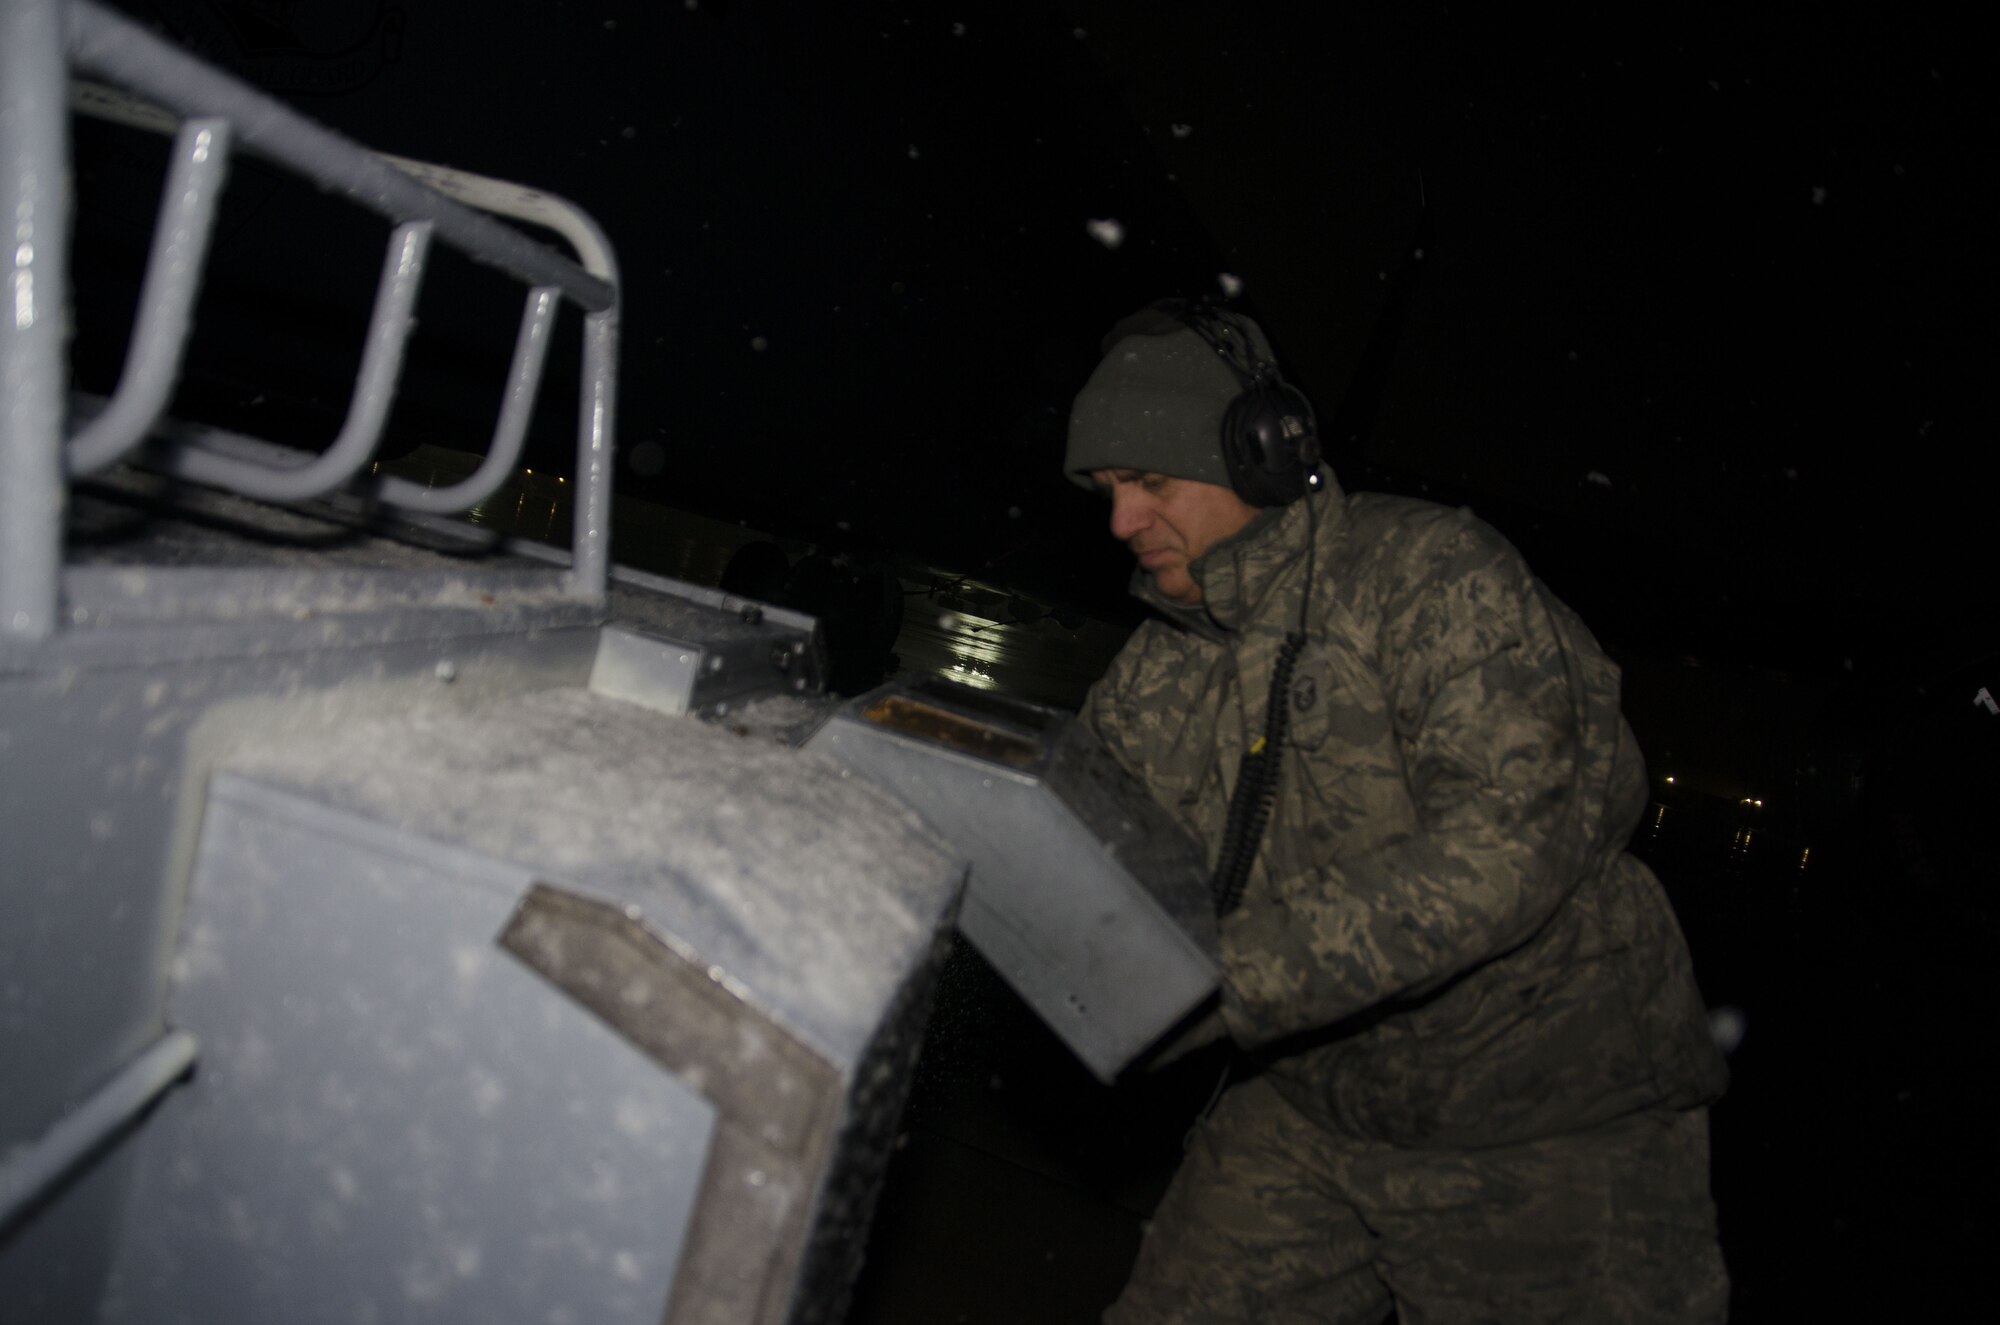 Snow falls as Master Sgt. Frank Diliberto, 108th KC-135R crew chief prepares a jet for the days flight at Joint Base McGuire-Dix-Lakehurst, N.J., Jan. 17, 2018. (U.S. Air National Guard photo by Staff Sgt. Ross A. Whitley)